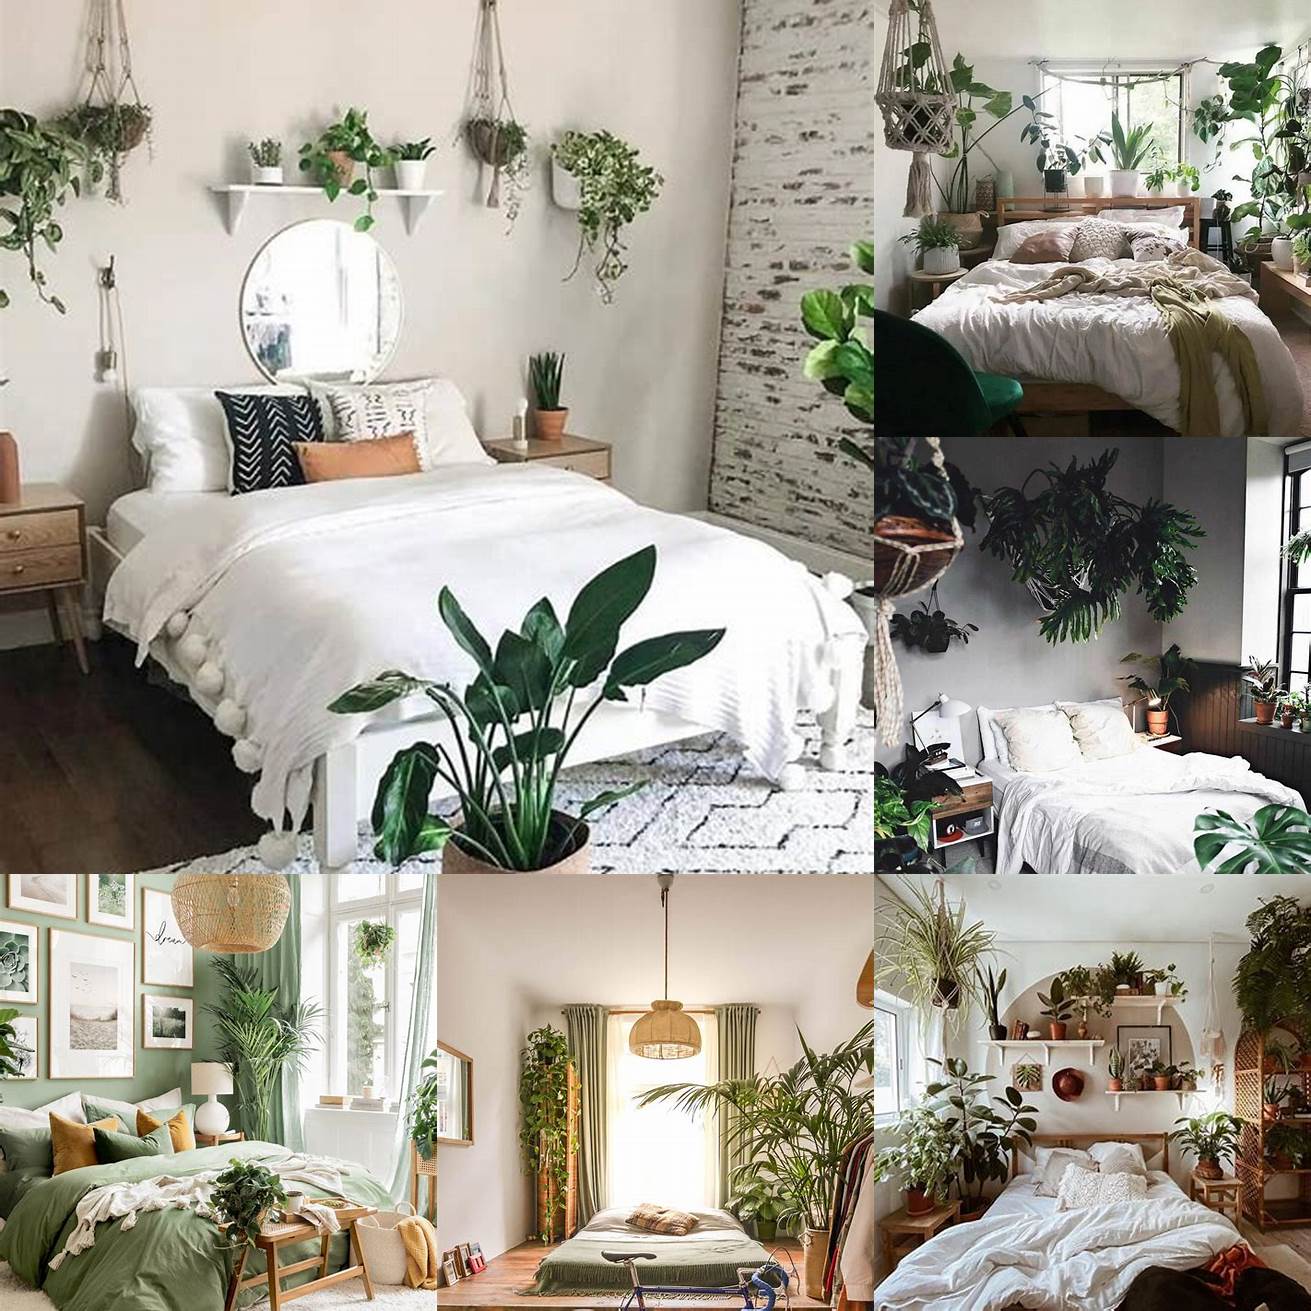 Image Idea White bedroom with green plants and natural textures